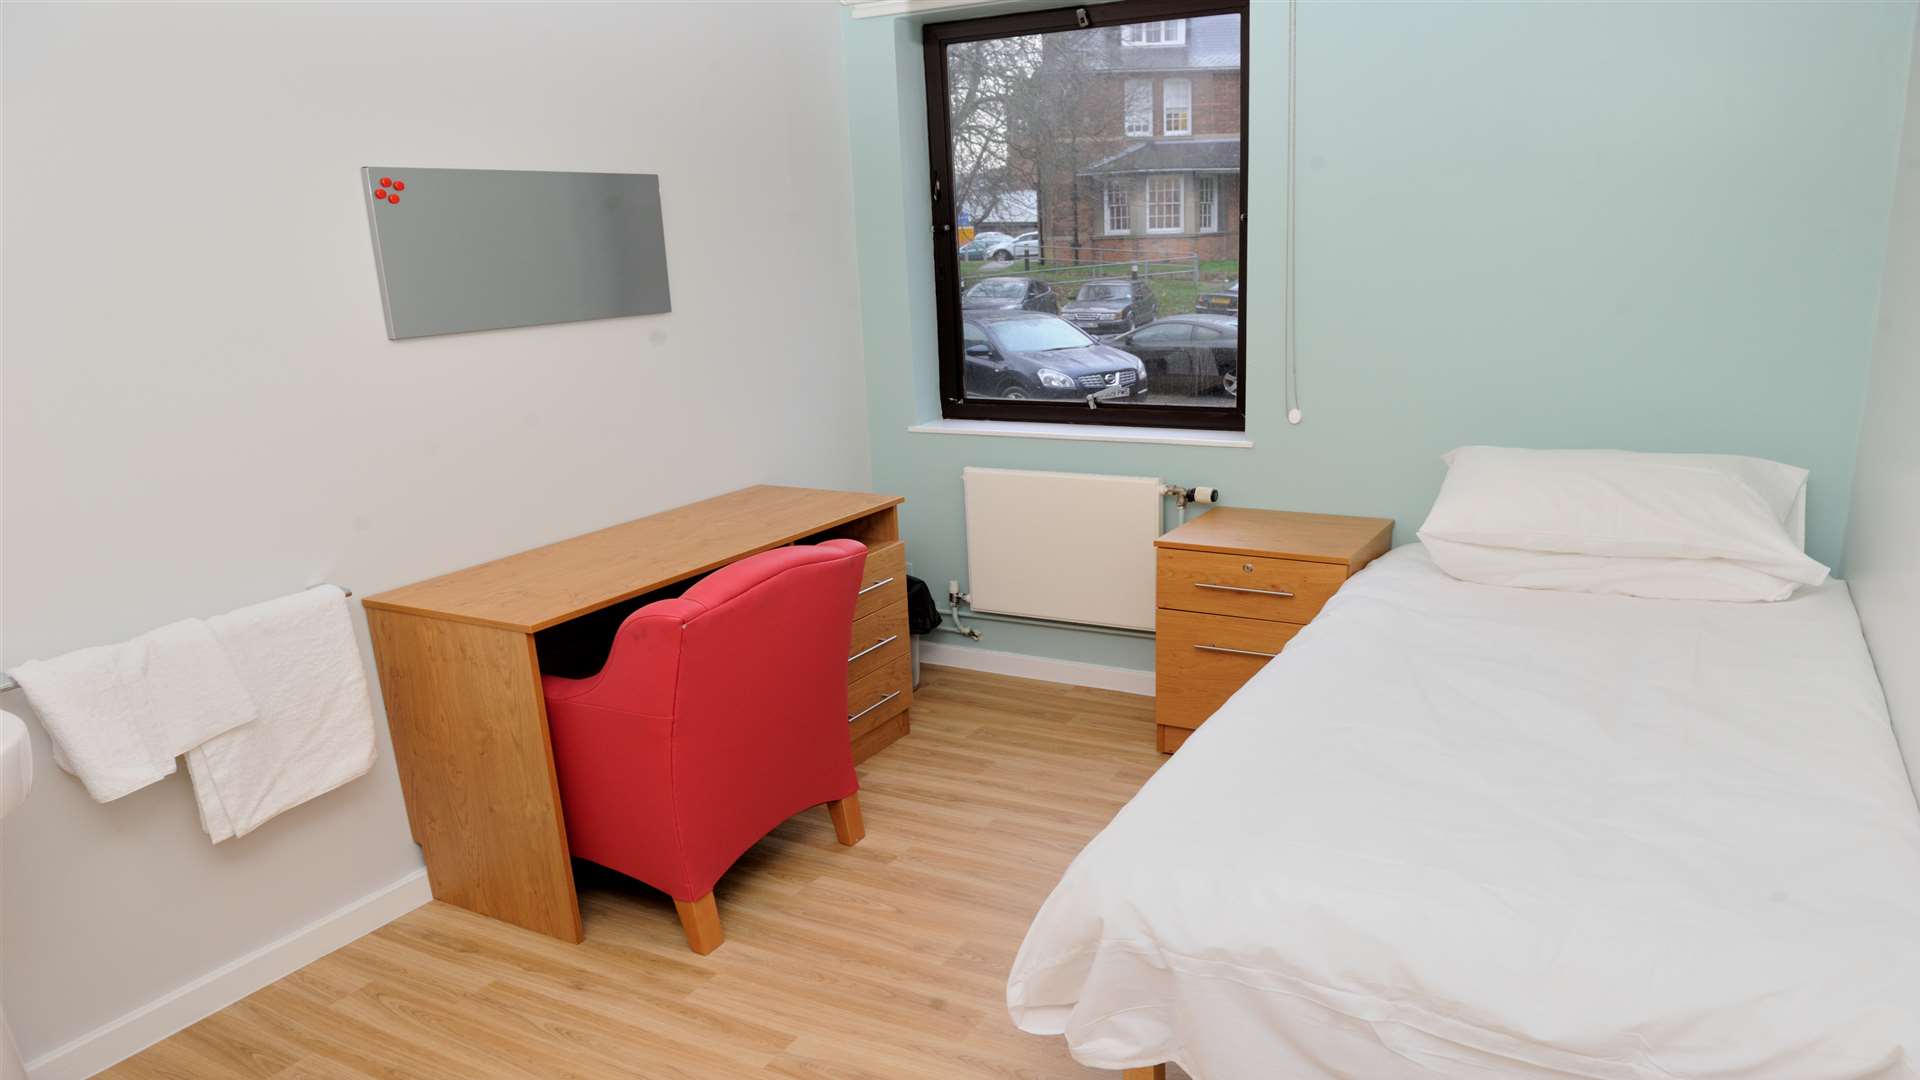 Up to 25 nurses will be able to stay in the new accommodation block.